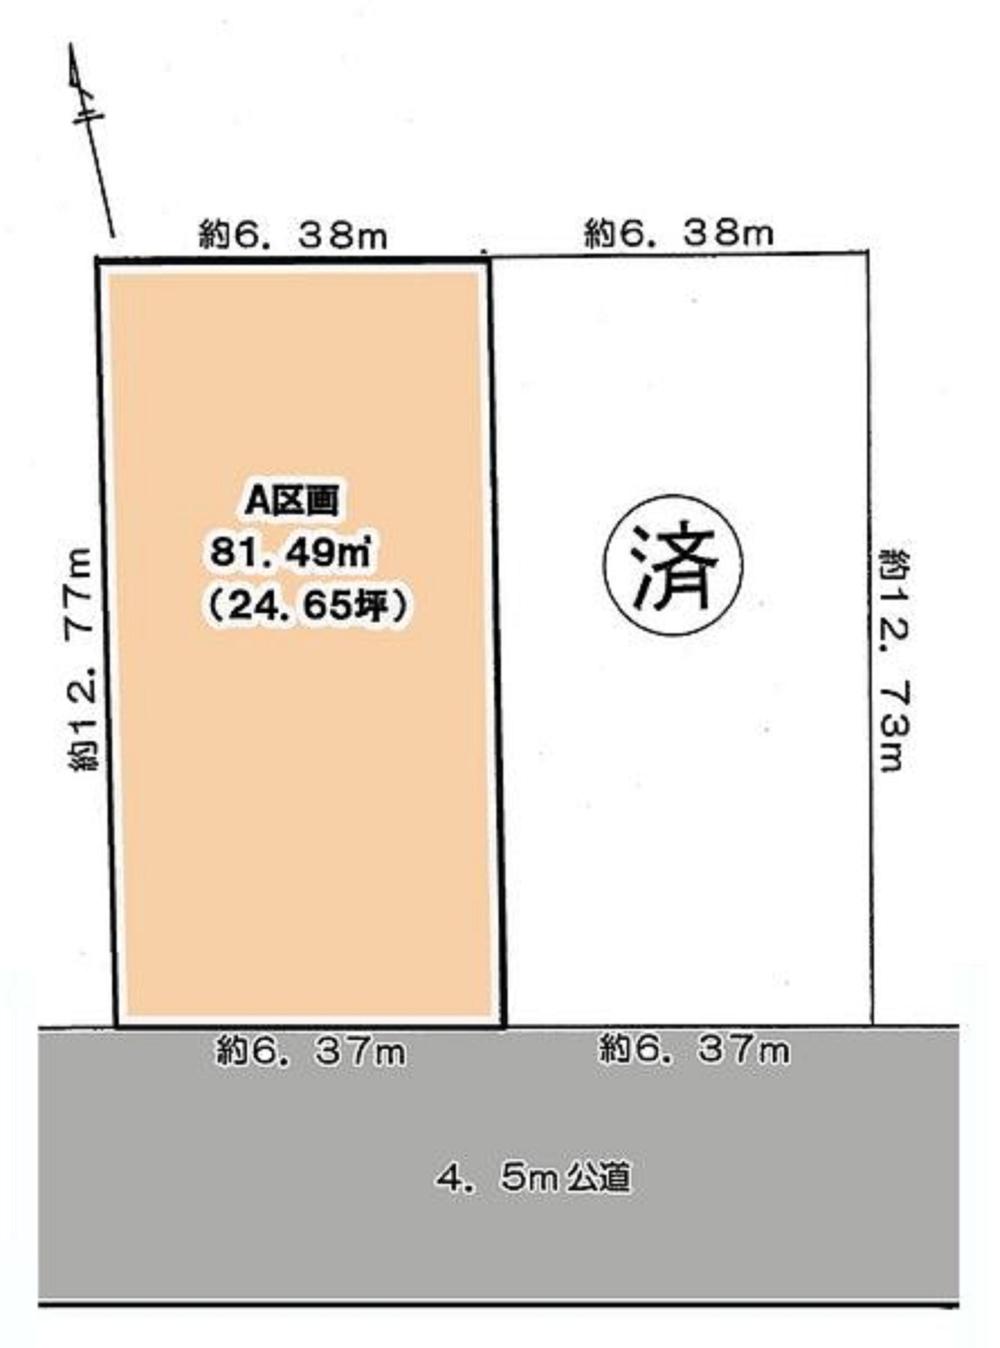 Compartment figure. Land price 22.5 million yen, It is shaping areas of land area 81.49 sq m south road.